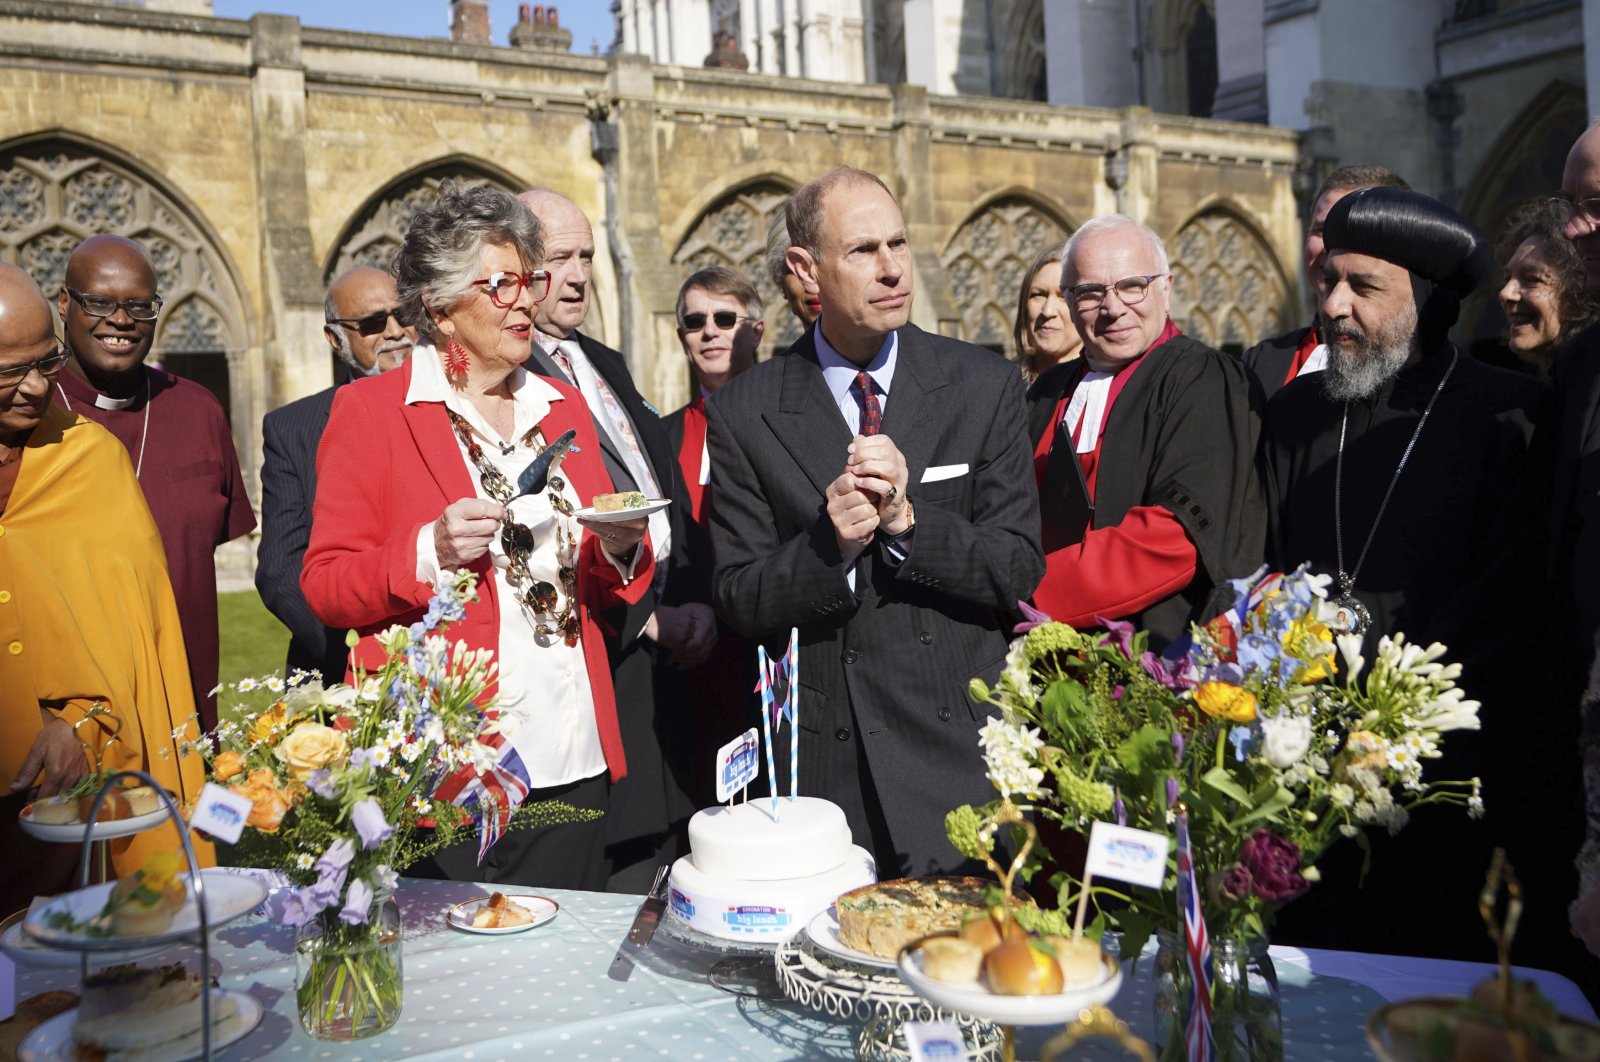 Prince Edward, Duke of Edinburg, tries the official coronation quiche at a Coronation Big Lunch hosted by the Archbishop of Canterbury, at Westminster Abbey, in London, U.K., April 18, 2023. (AP Photo)